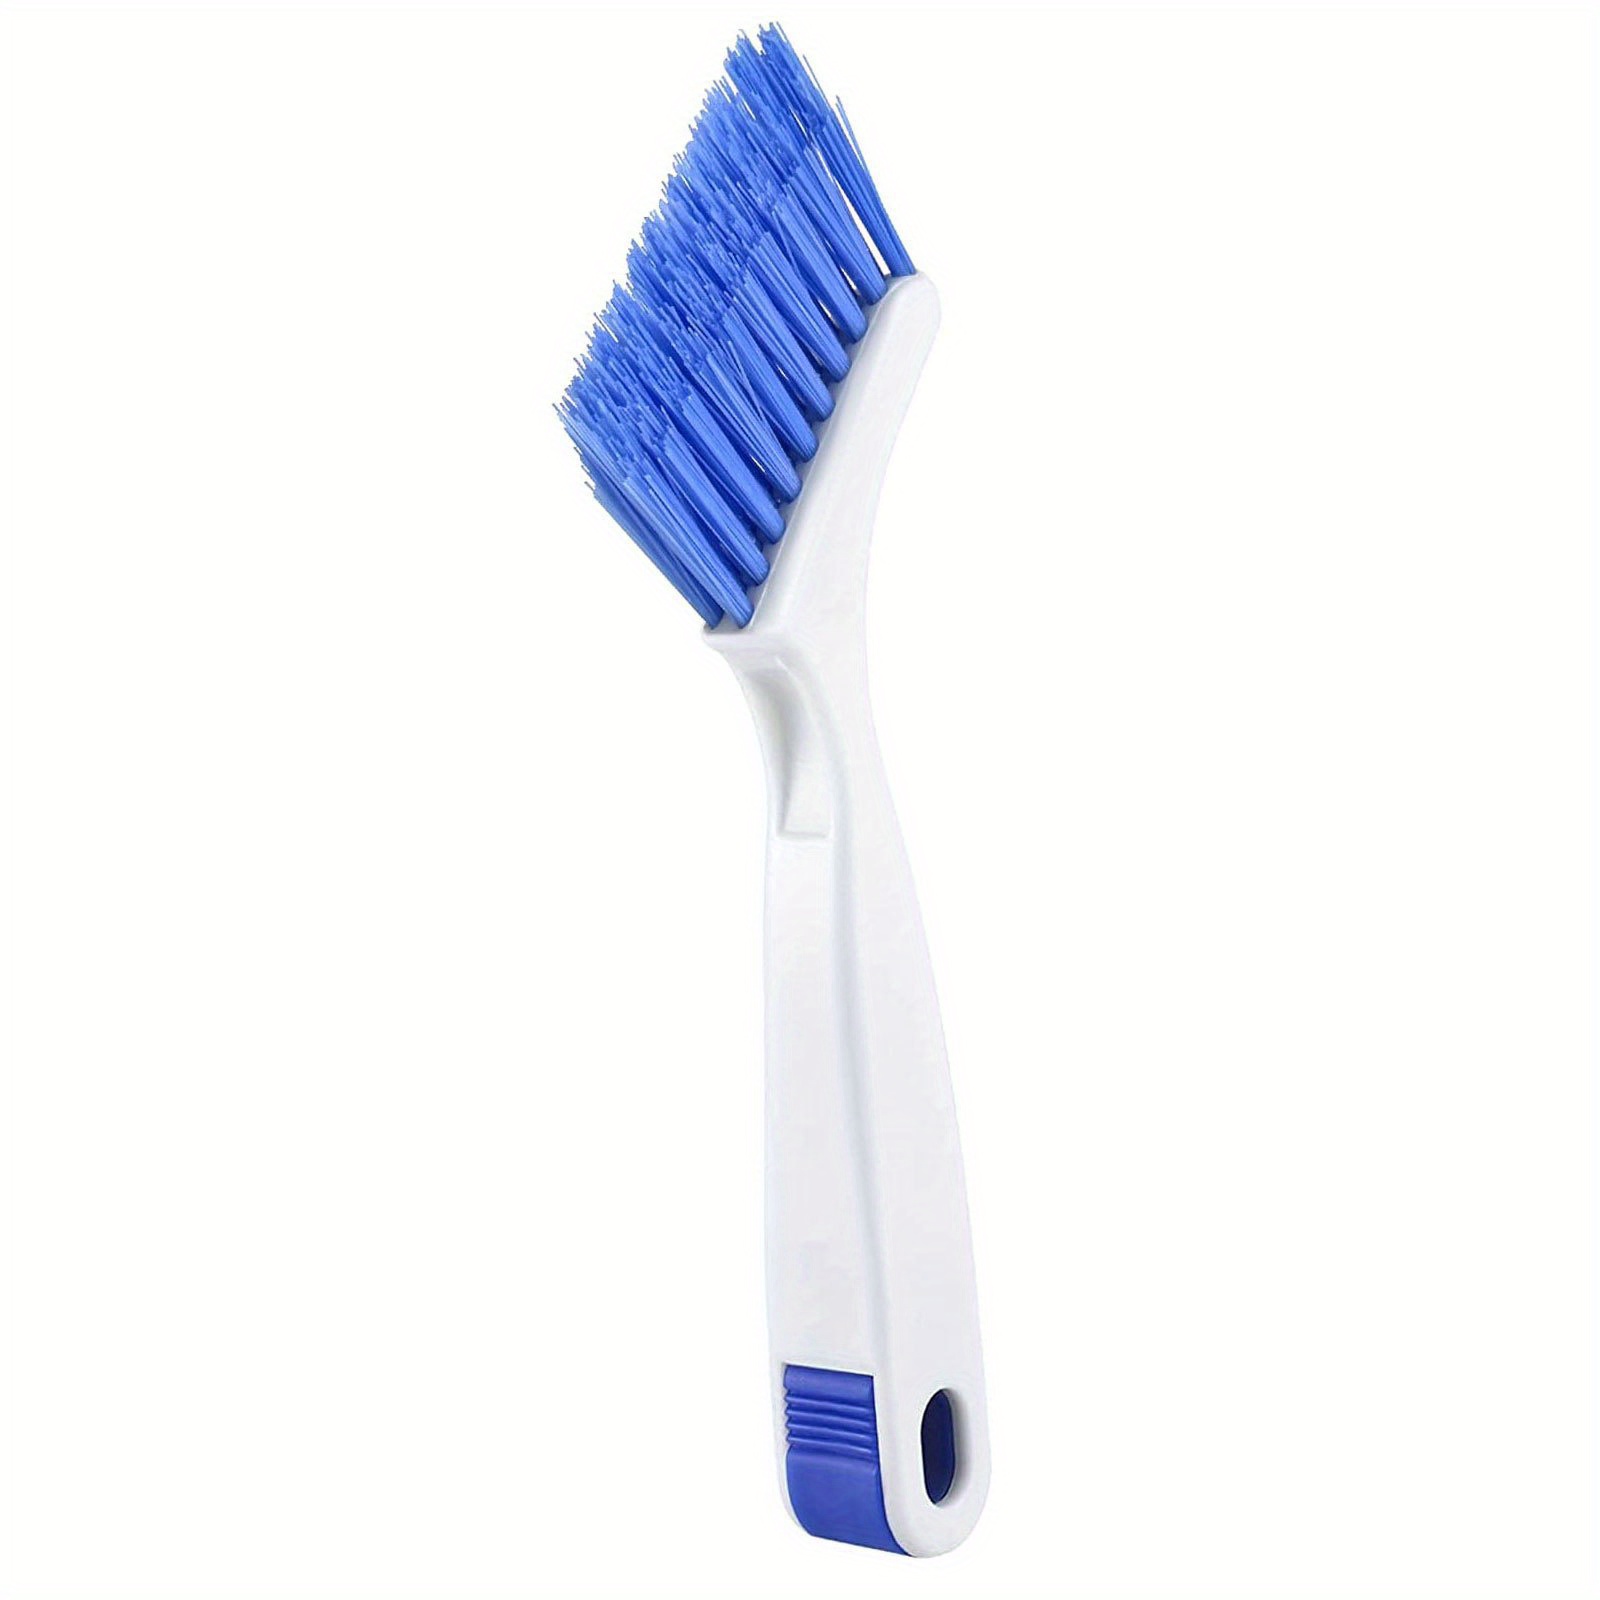 XMMSWDLA Cleaning Brush Small Scrub Brush for Cleaning Bottle Sink Kitchen  Brush, Edge Corner Grout Bathroom Cleaning Brushes, Sliding Door or Window